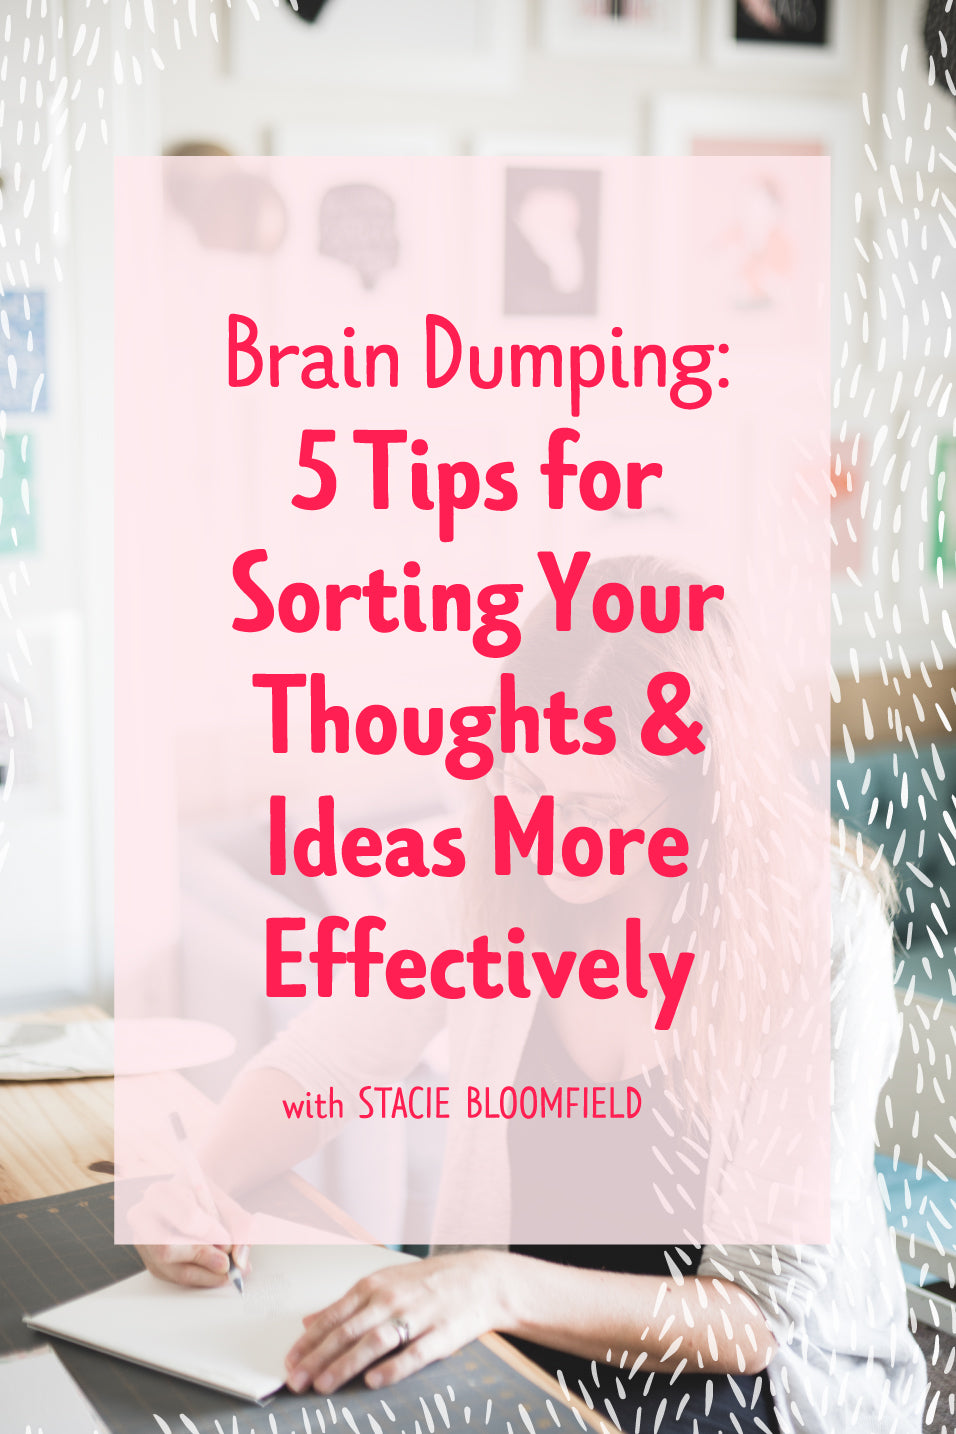 Brain Dumping! 5 Tips for Sorting Your Thoughts and Ideas More Effectively